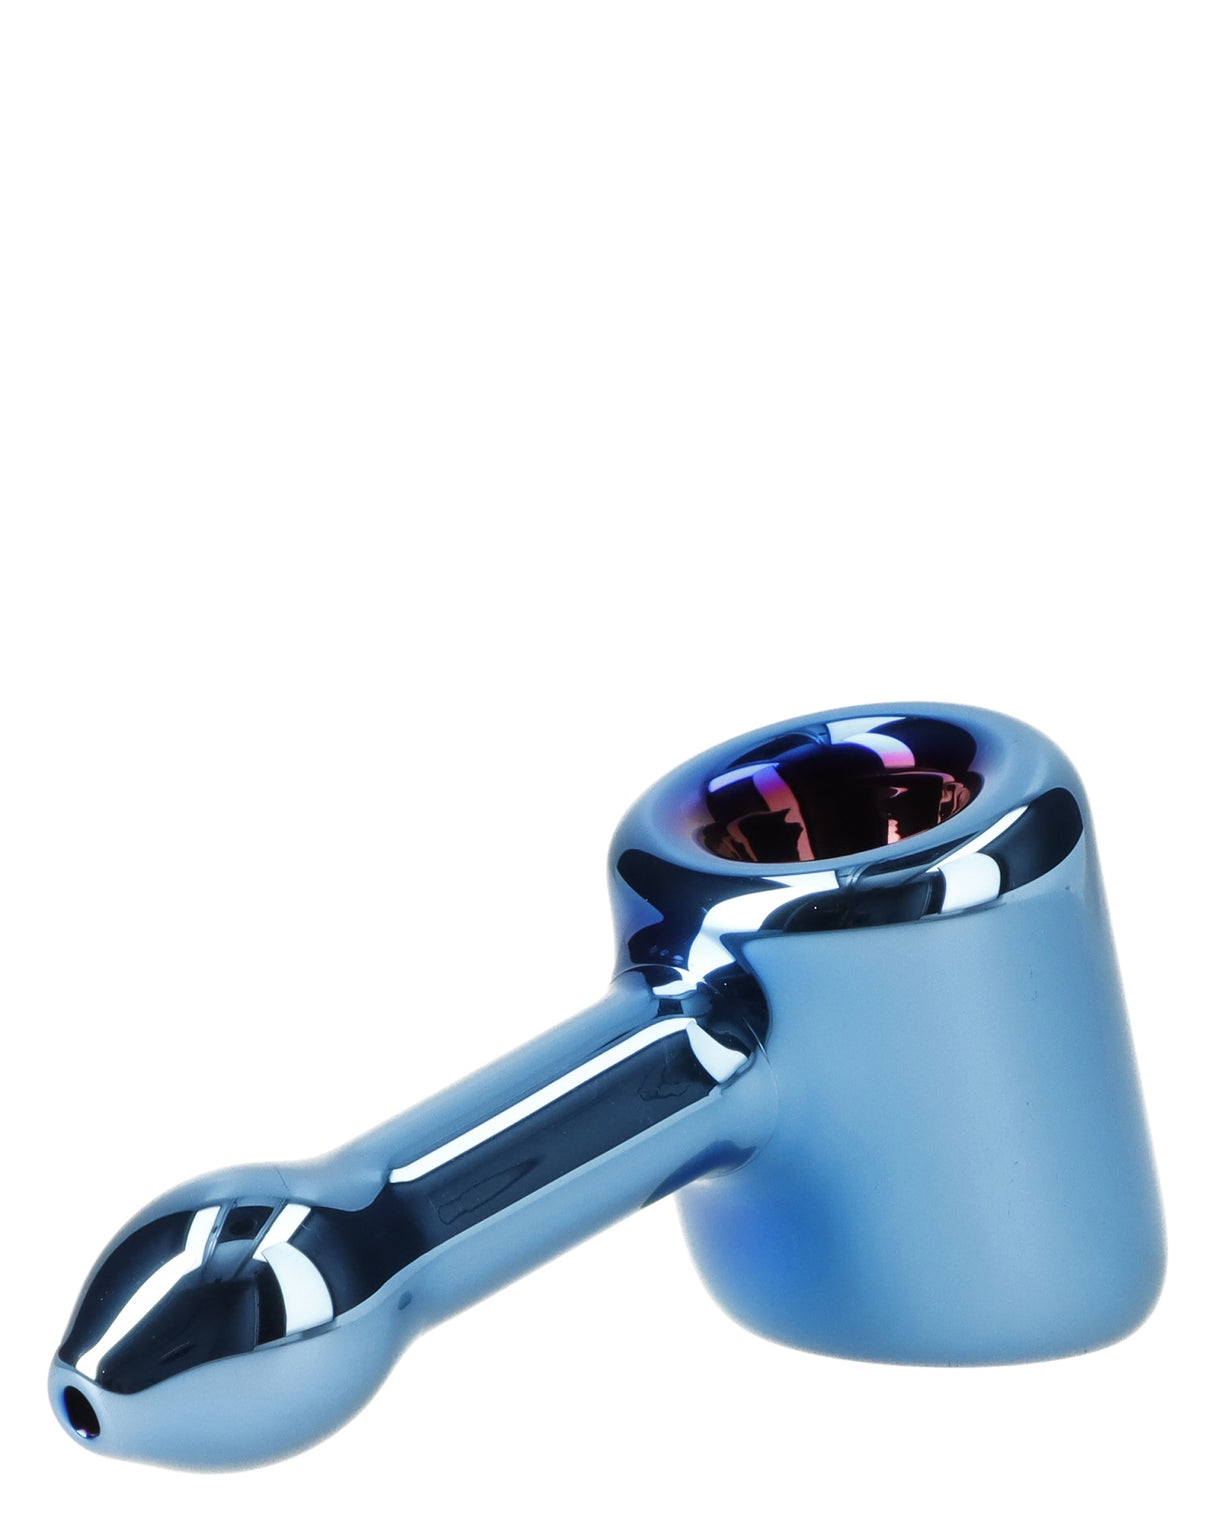 Fumed Blue Hammer Pipe - 4in Borosilicate Glass - Side View on White Background